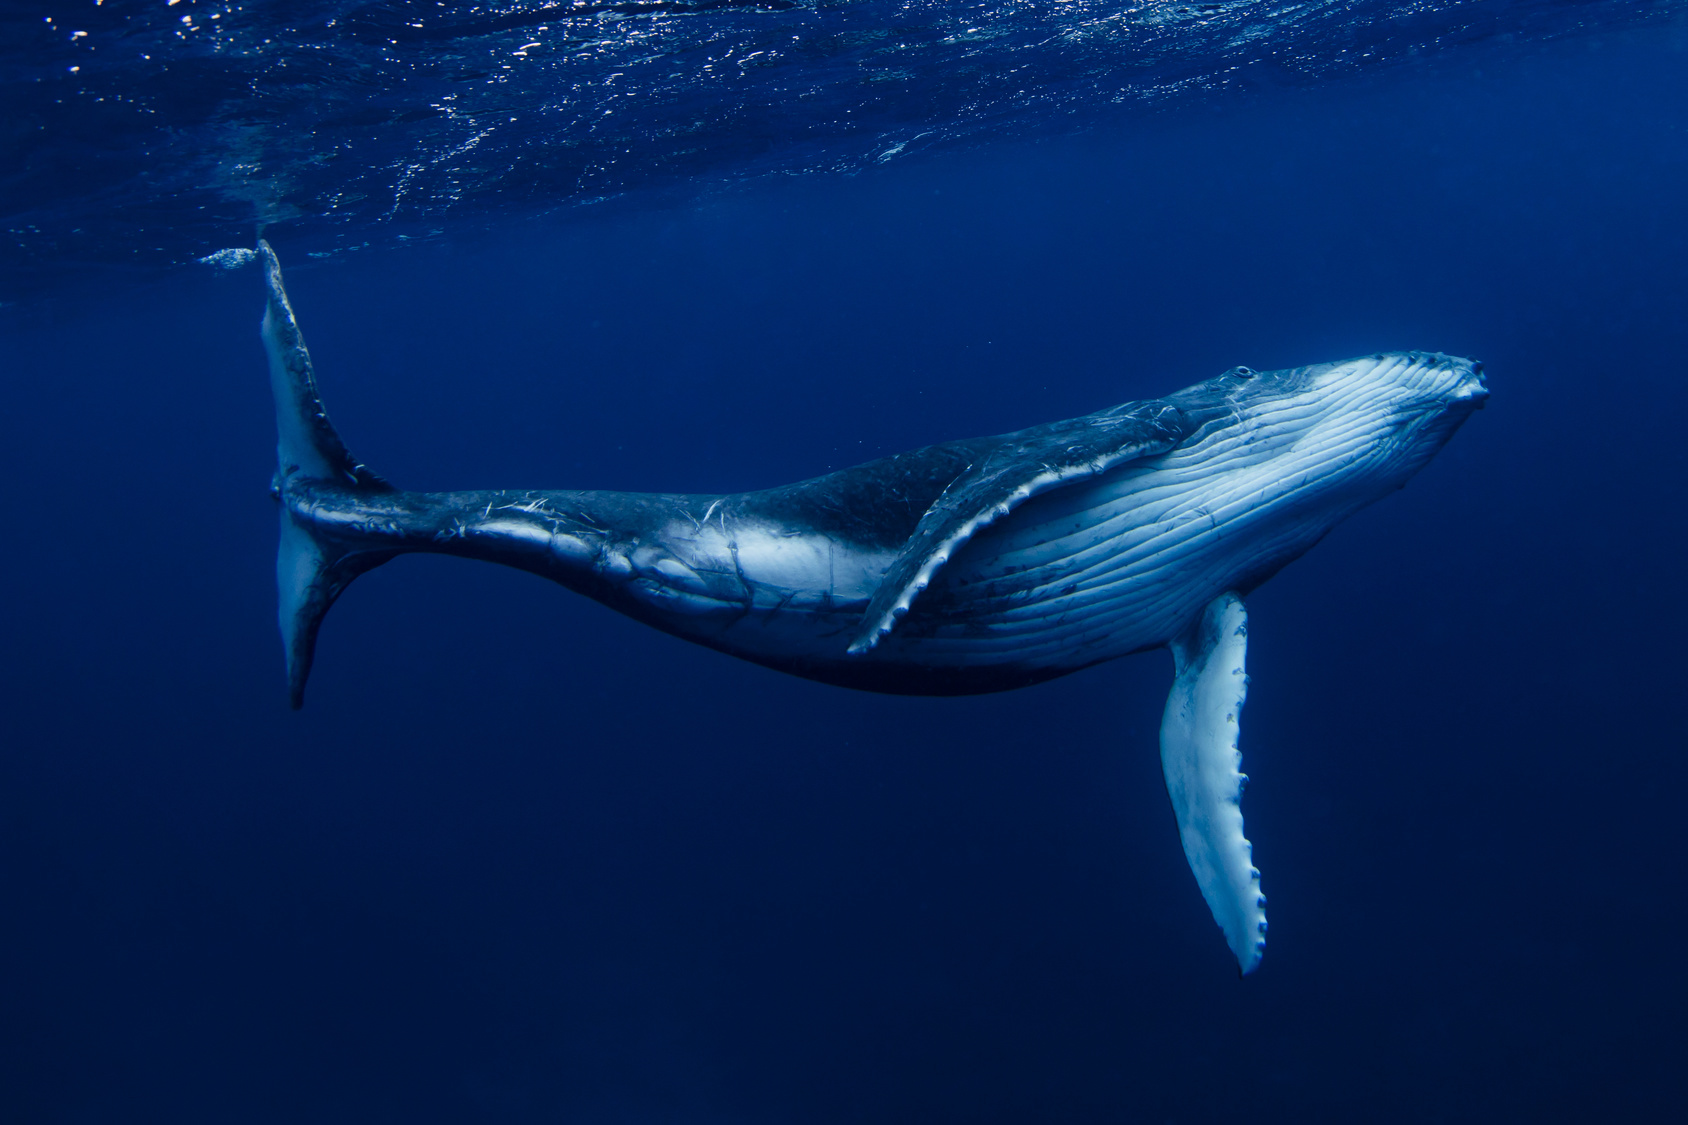 Humpback whale swimming Underwater, Tonga, South Pacific